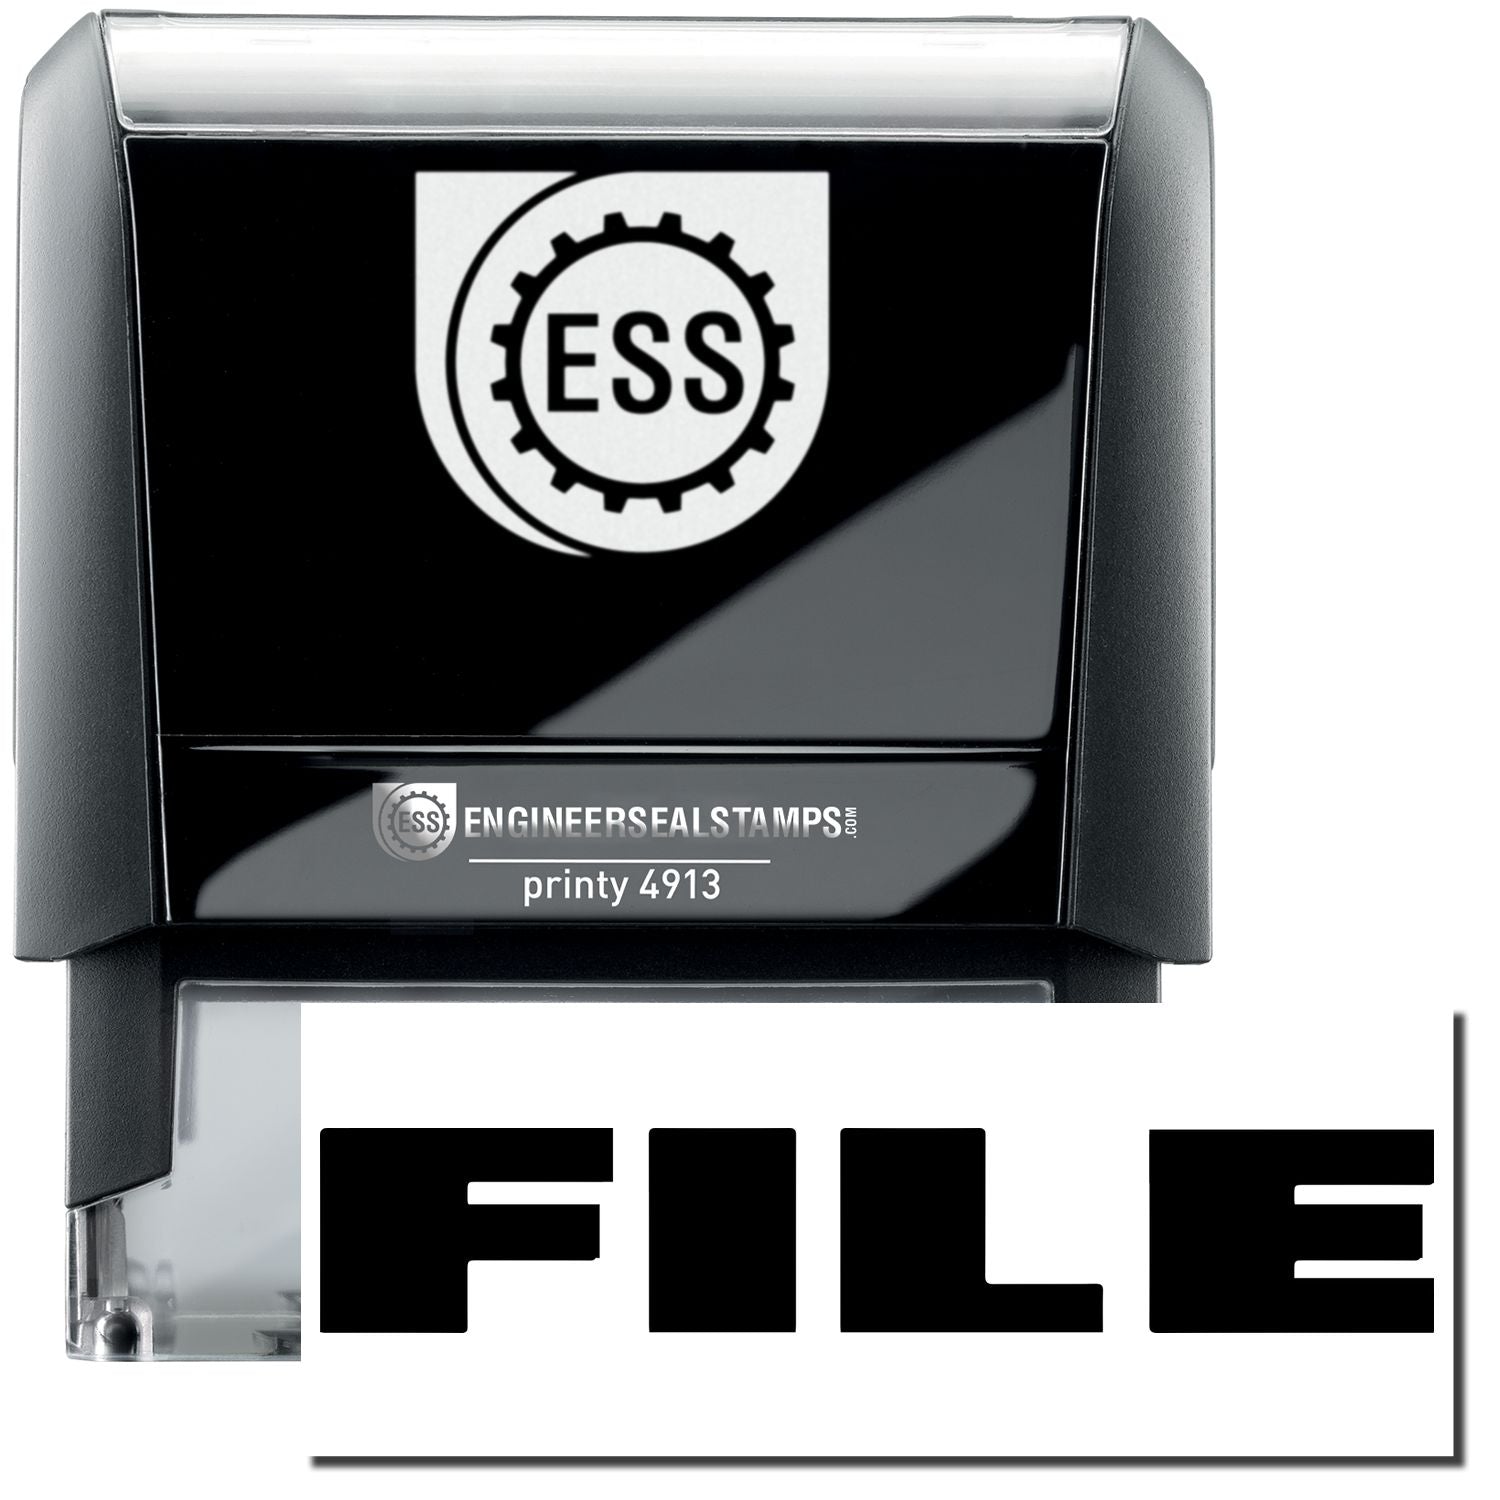 A self-inking stamp with a stamped image showing how the text "FILE" in a large bold font is displayed by it after stamping.